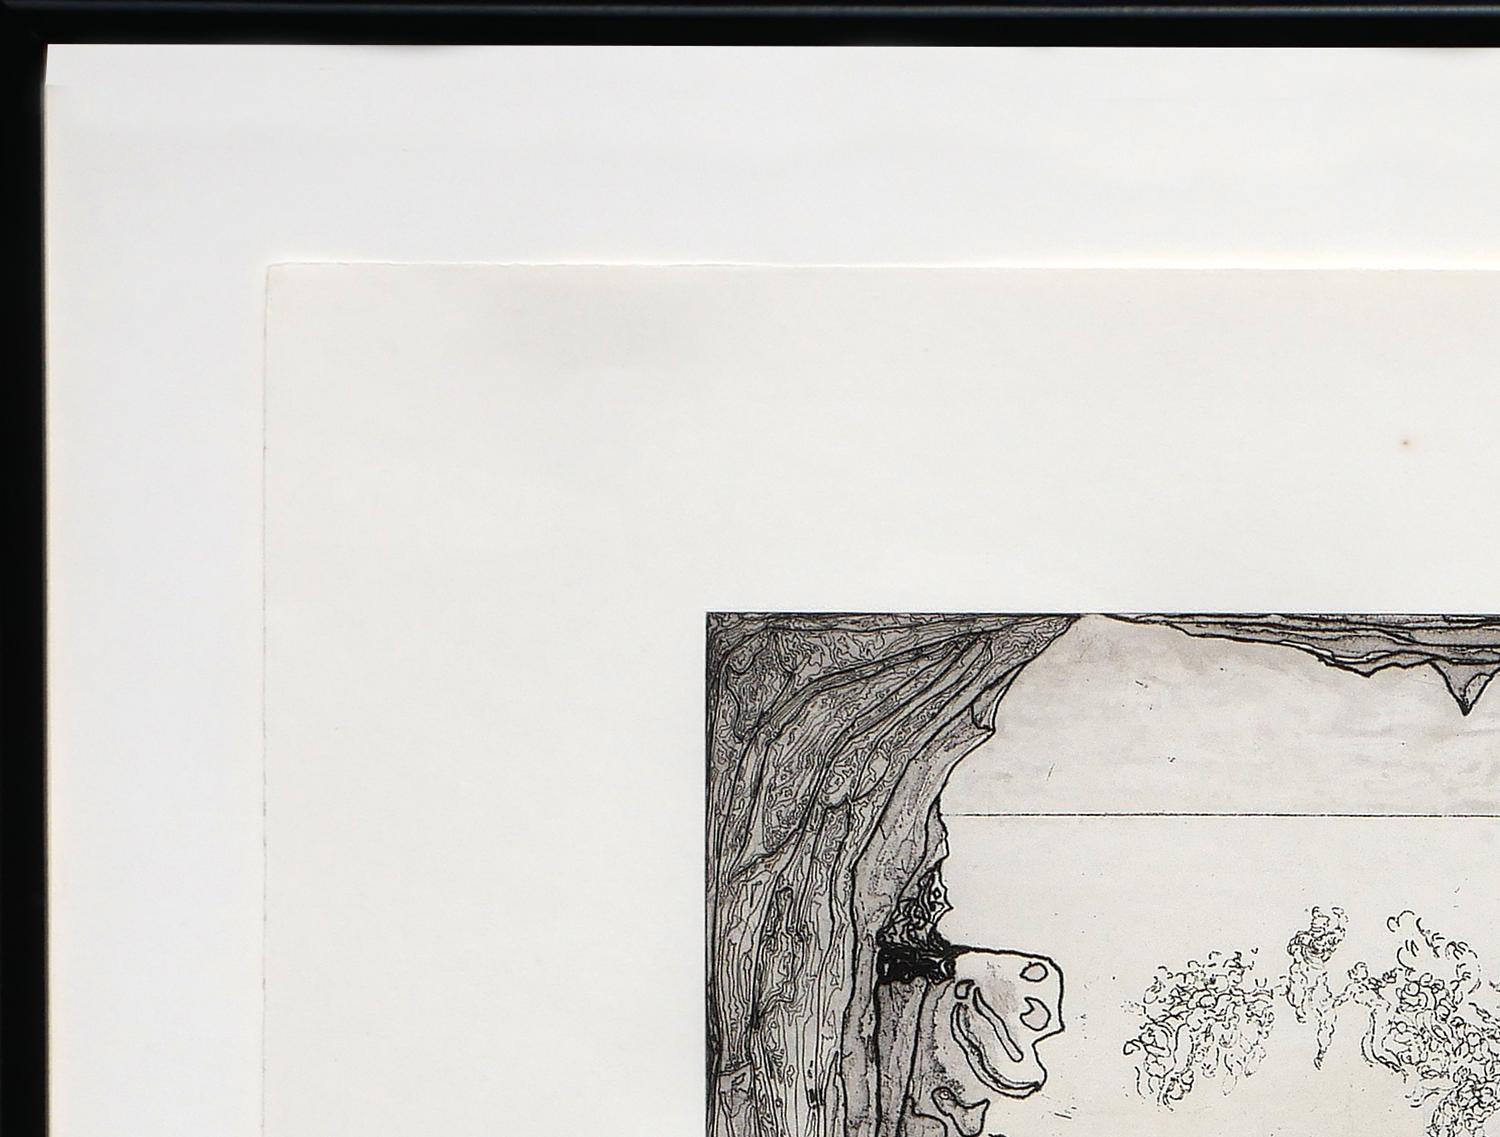 Monochromatic abstract figurative etching by Spanish painter Jorge Castillo. The piece depicts an abstract landscape overlooking an empty view from what appears to be a cave. Figures of abstracted limbs and bodies are depicted along the sides of the